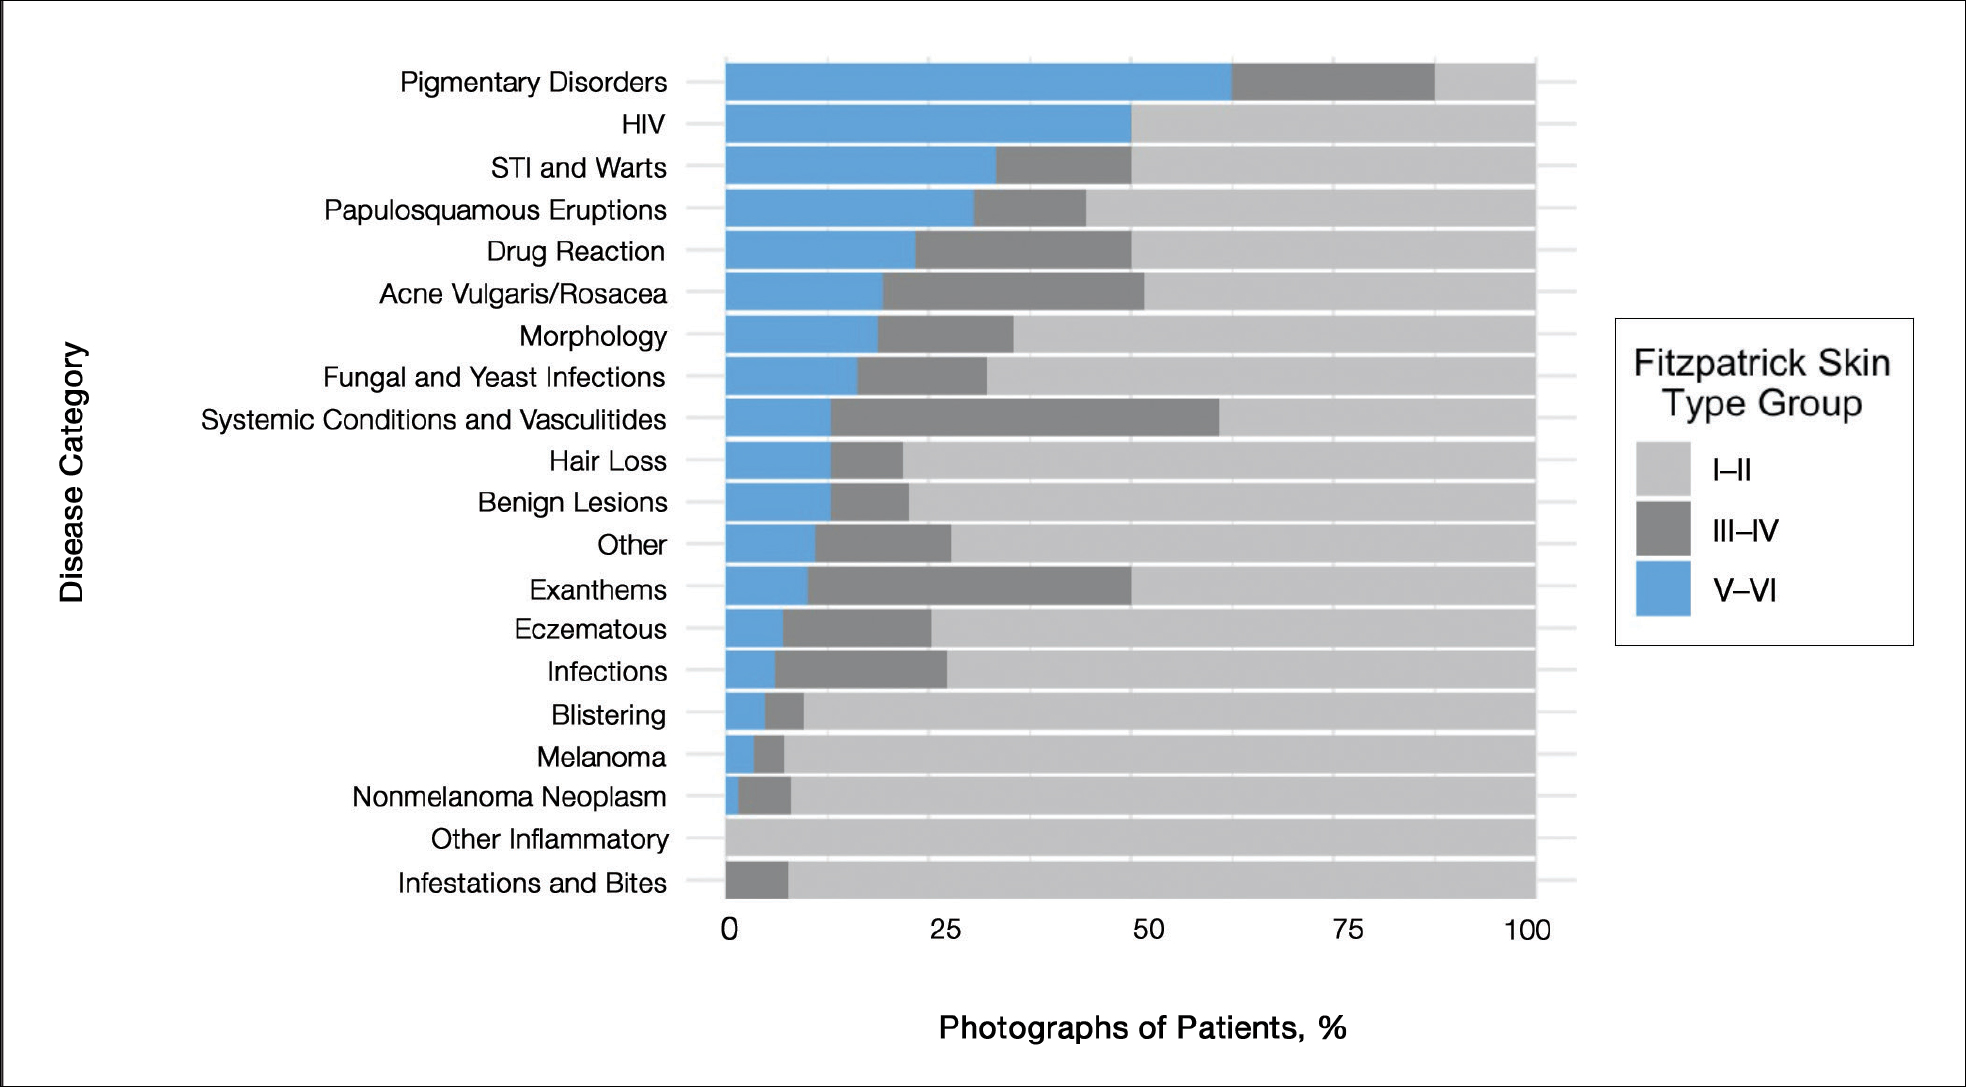 Percentage of photographs of patients with light and dark skin by disease category in the American Academy of Dermatology Basic Dermatology Curriculum